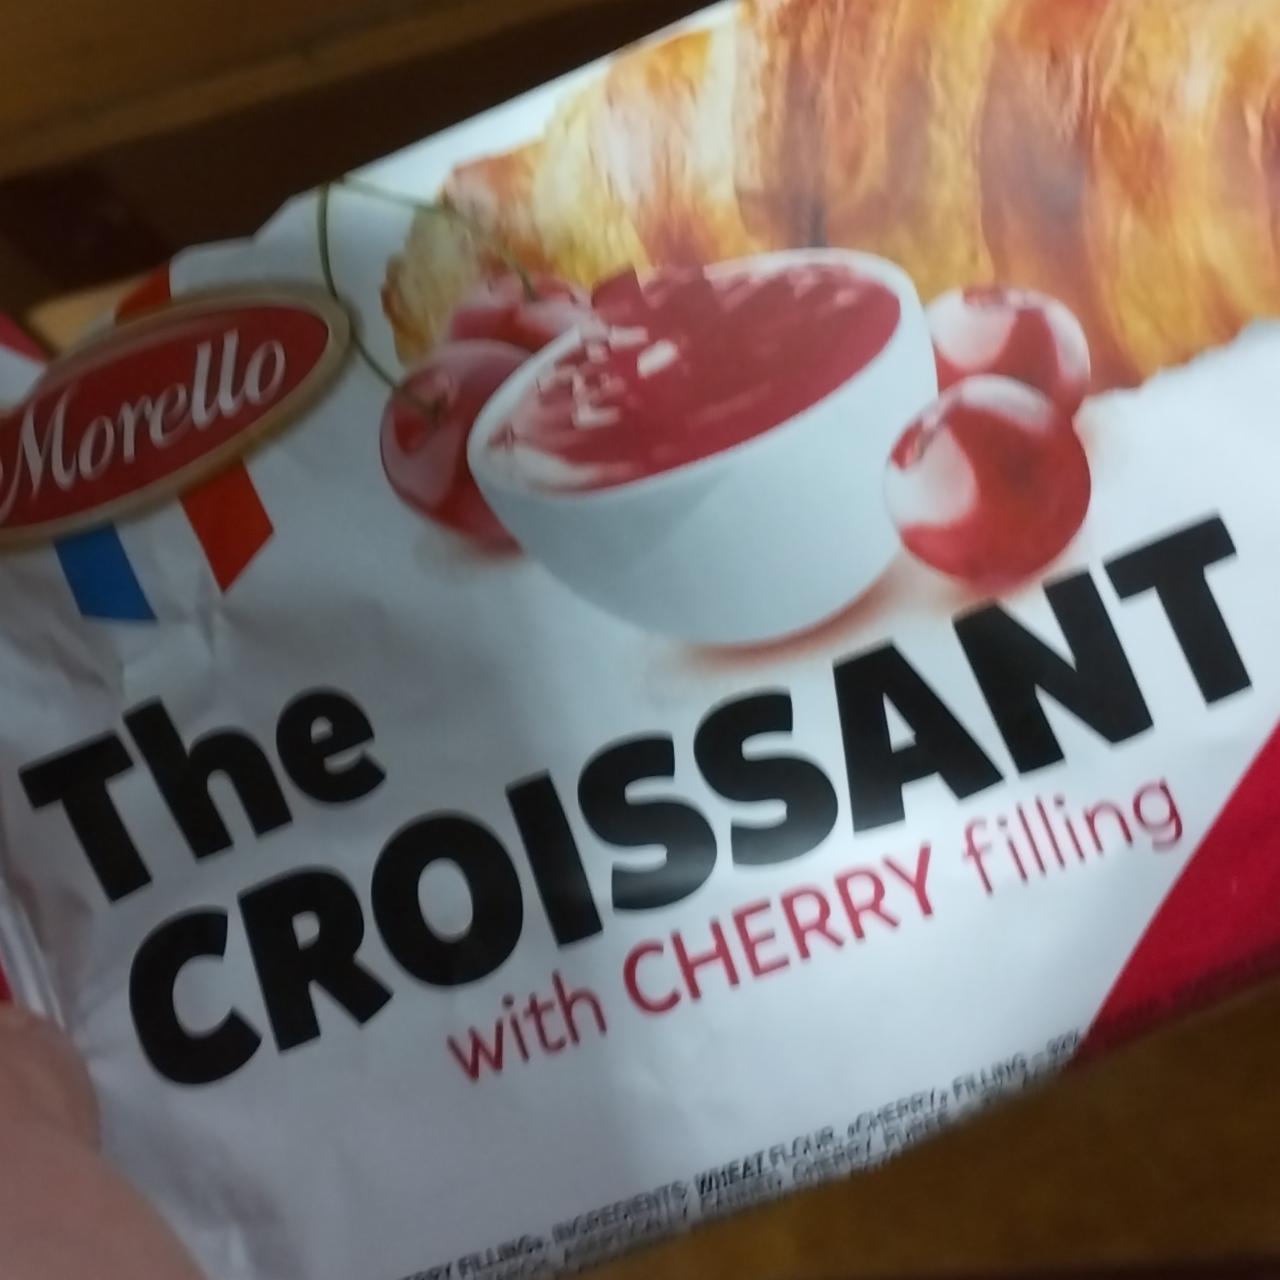 Képek - The croissant with cherry filling Morello